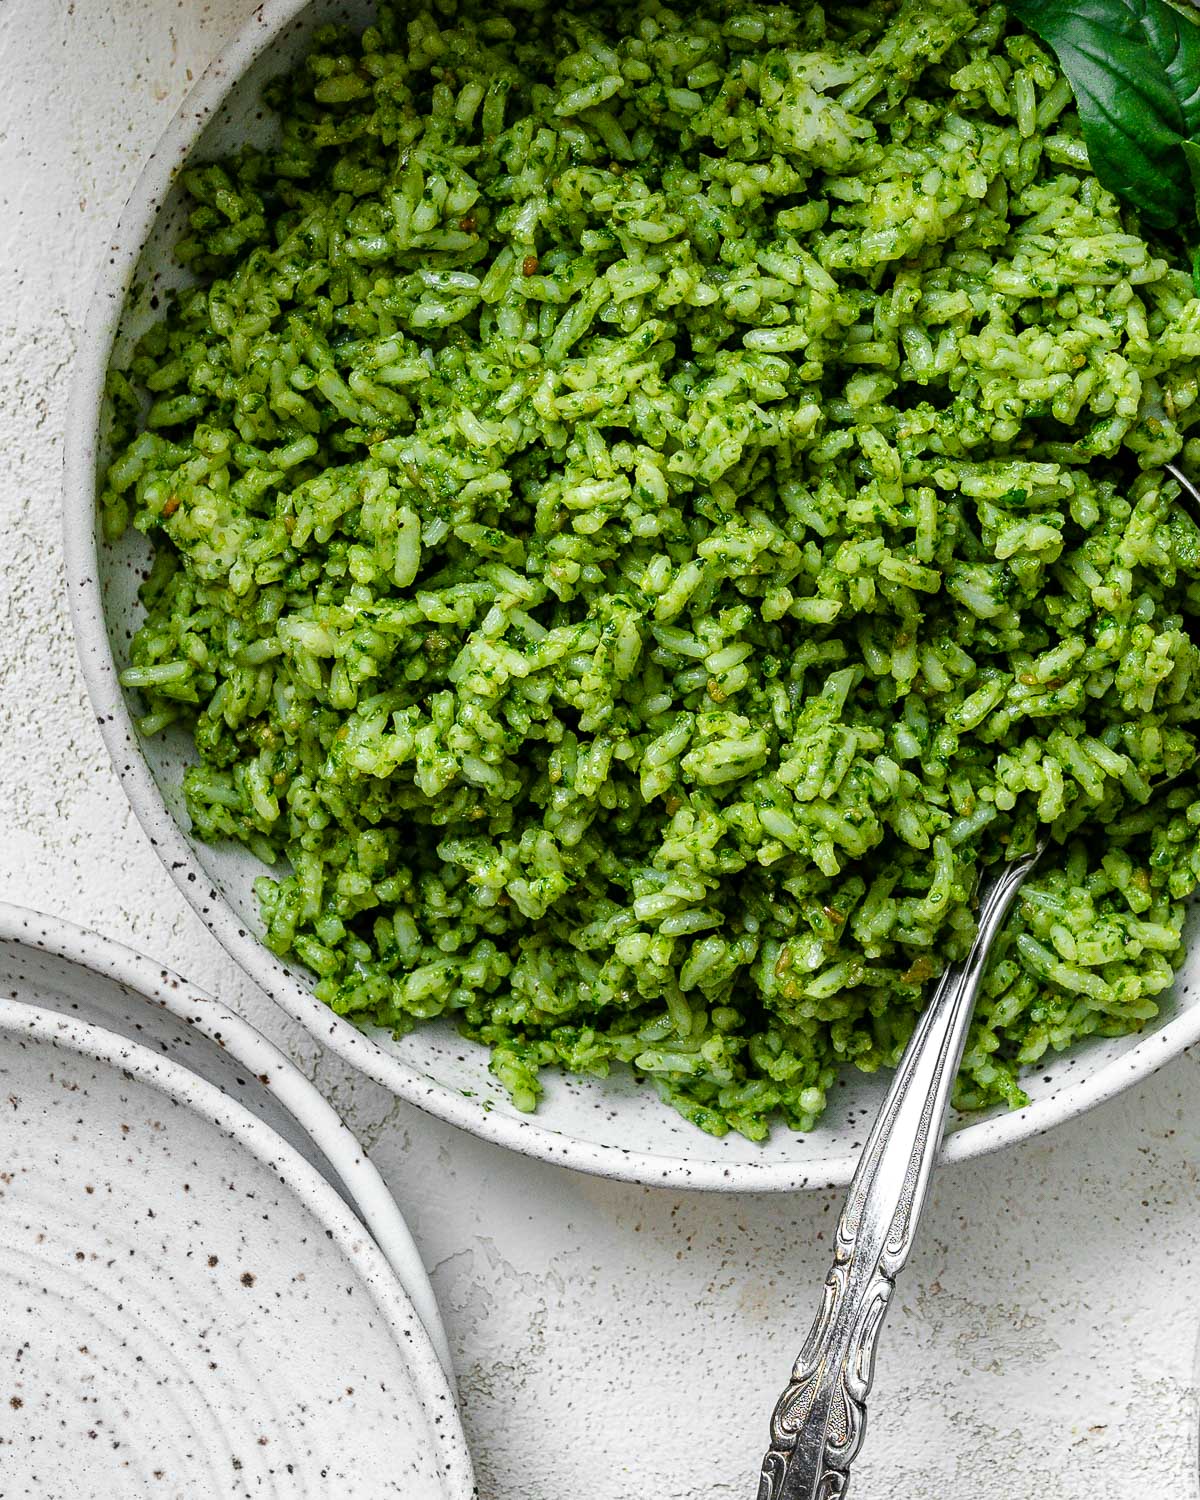 completed pesto rice against a light surface